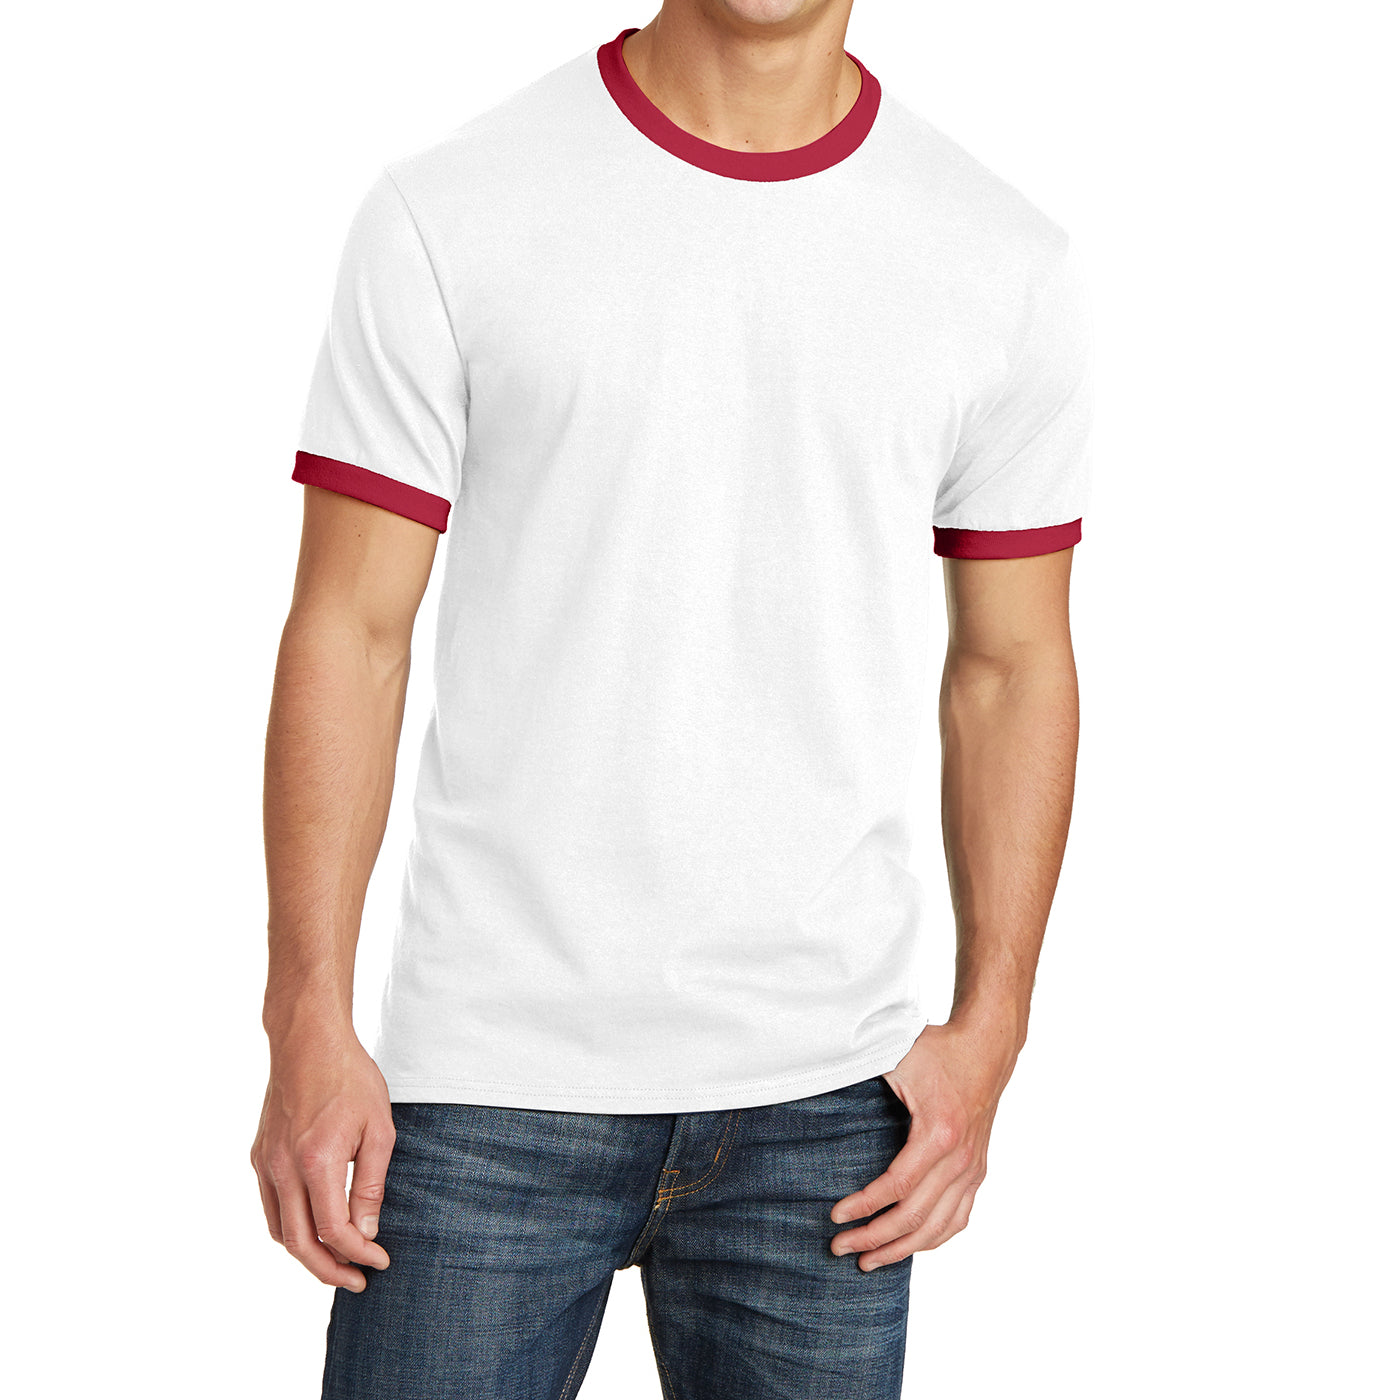 Men's Core Cotton Ringer Tee - White/Red - Front